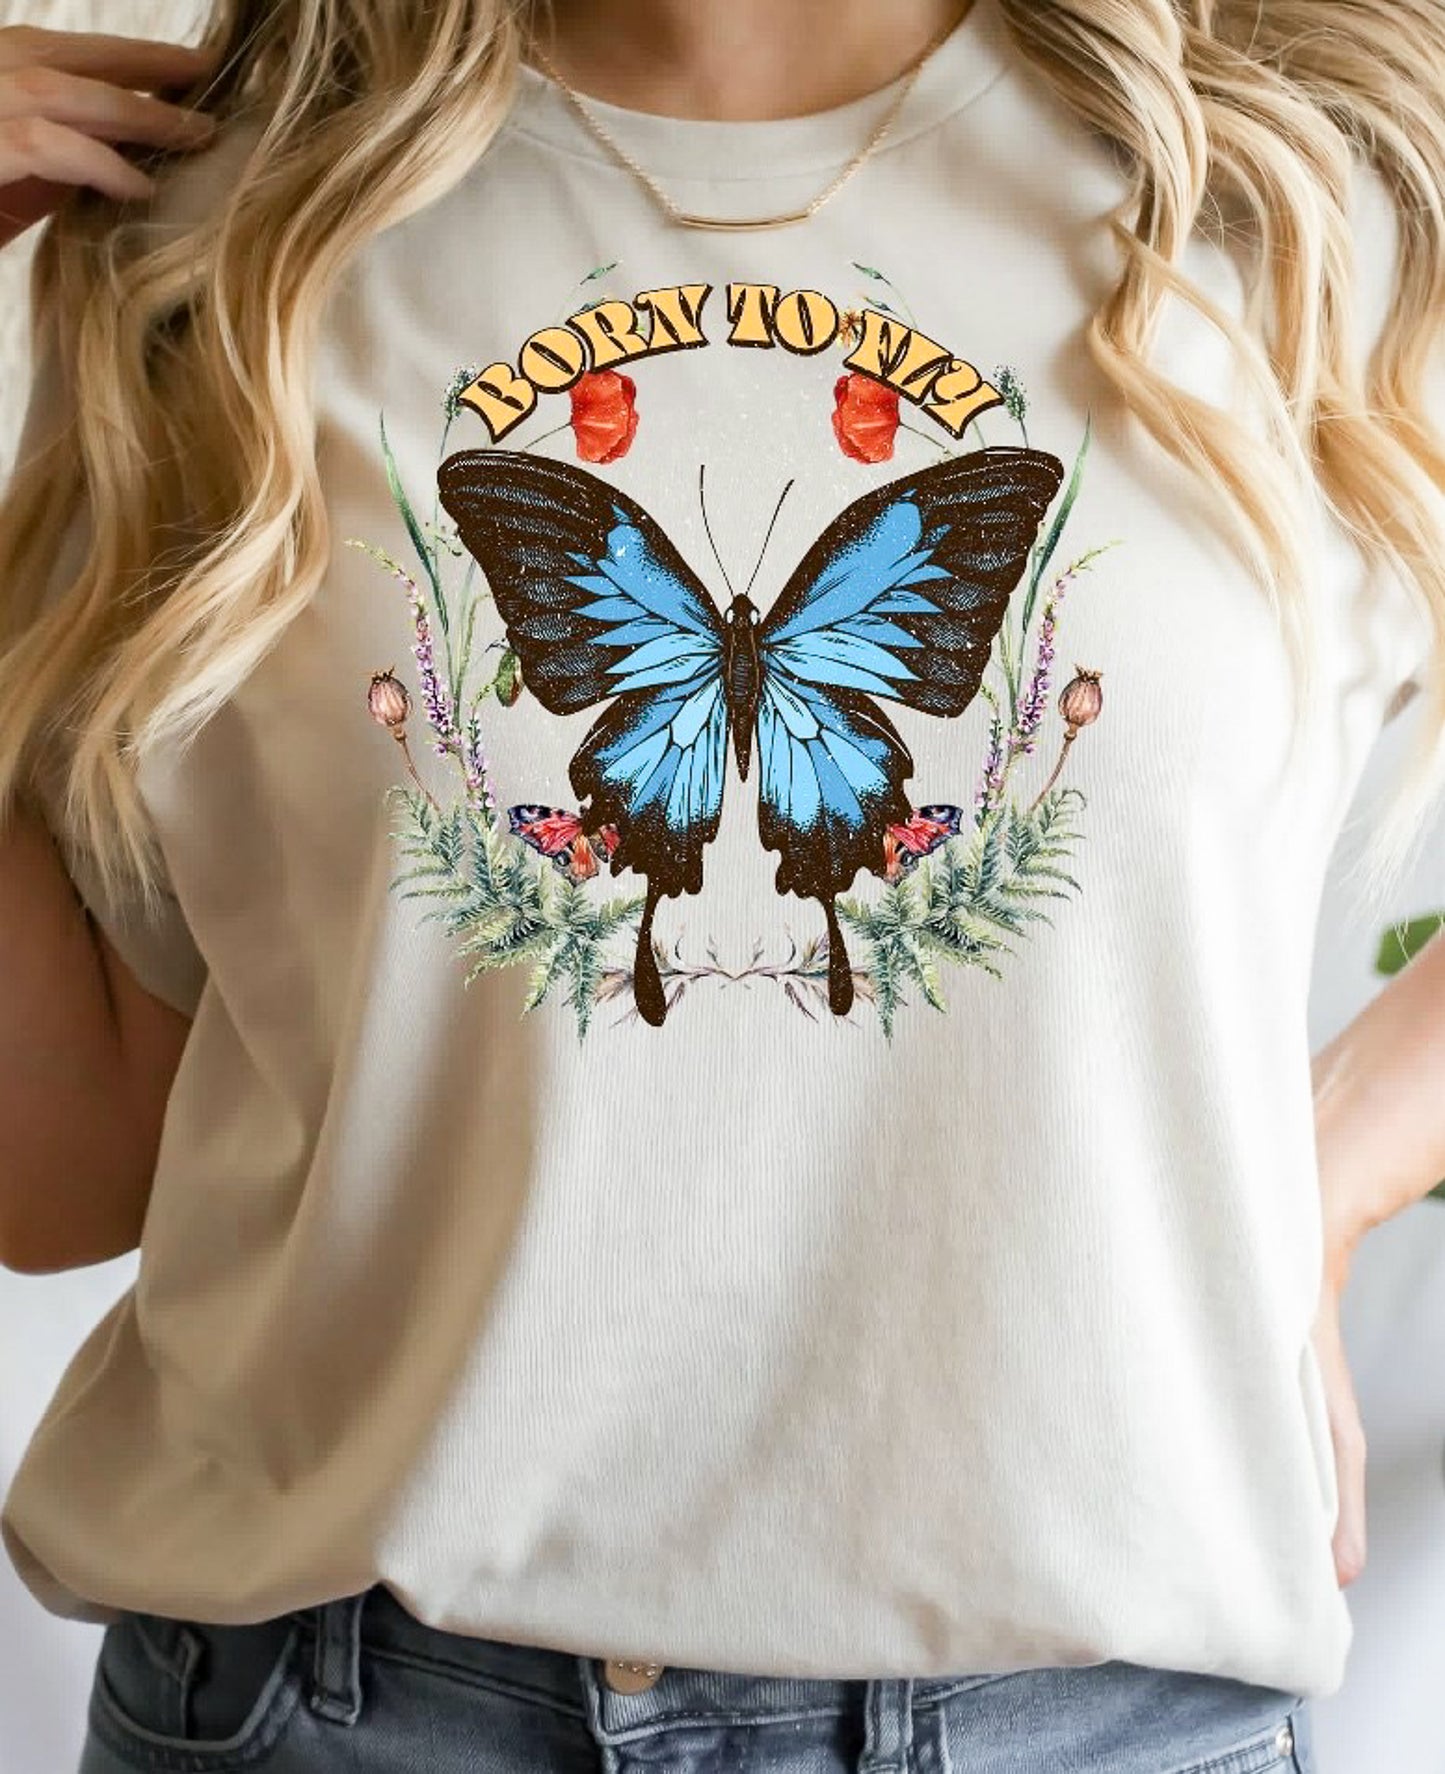 Born To Fly Butterfly Tee